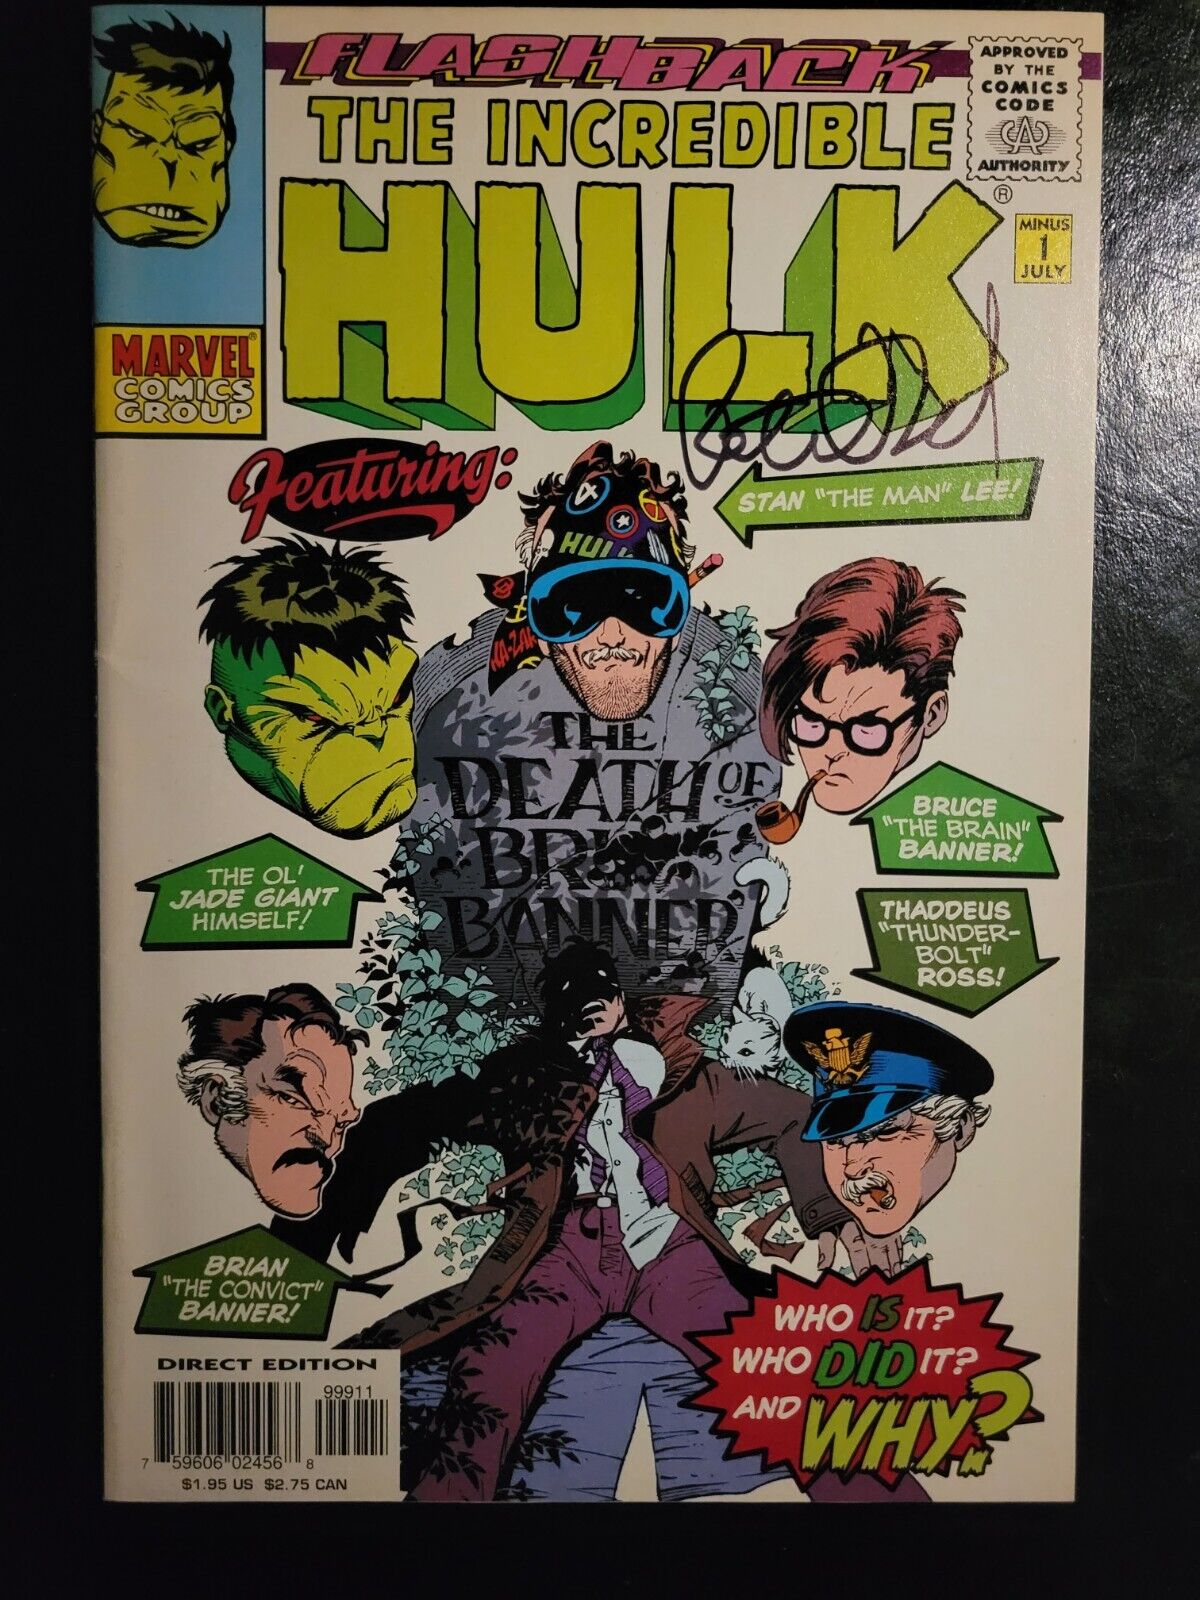 The Incredible Hulk -1 NM 9.2+ Copy, **Signed By Peter David** Marvel Comics